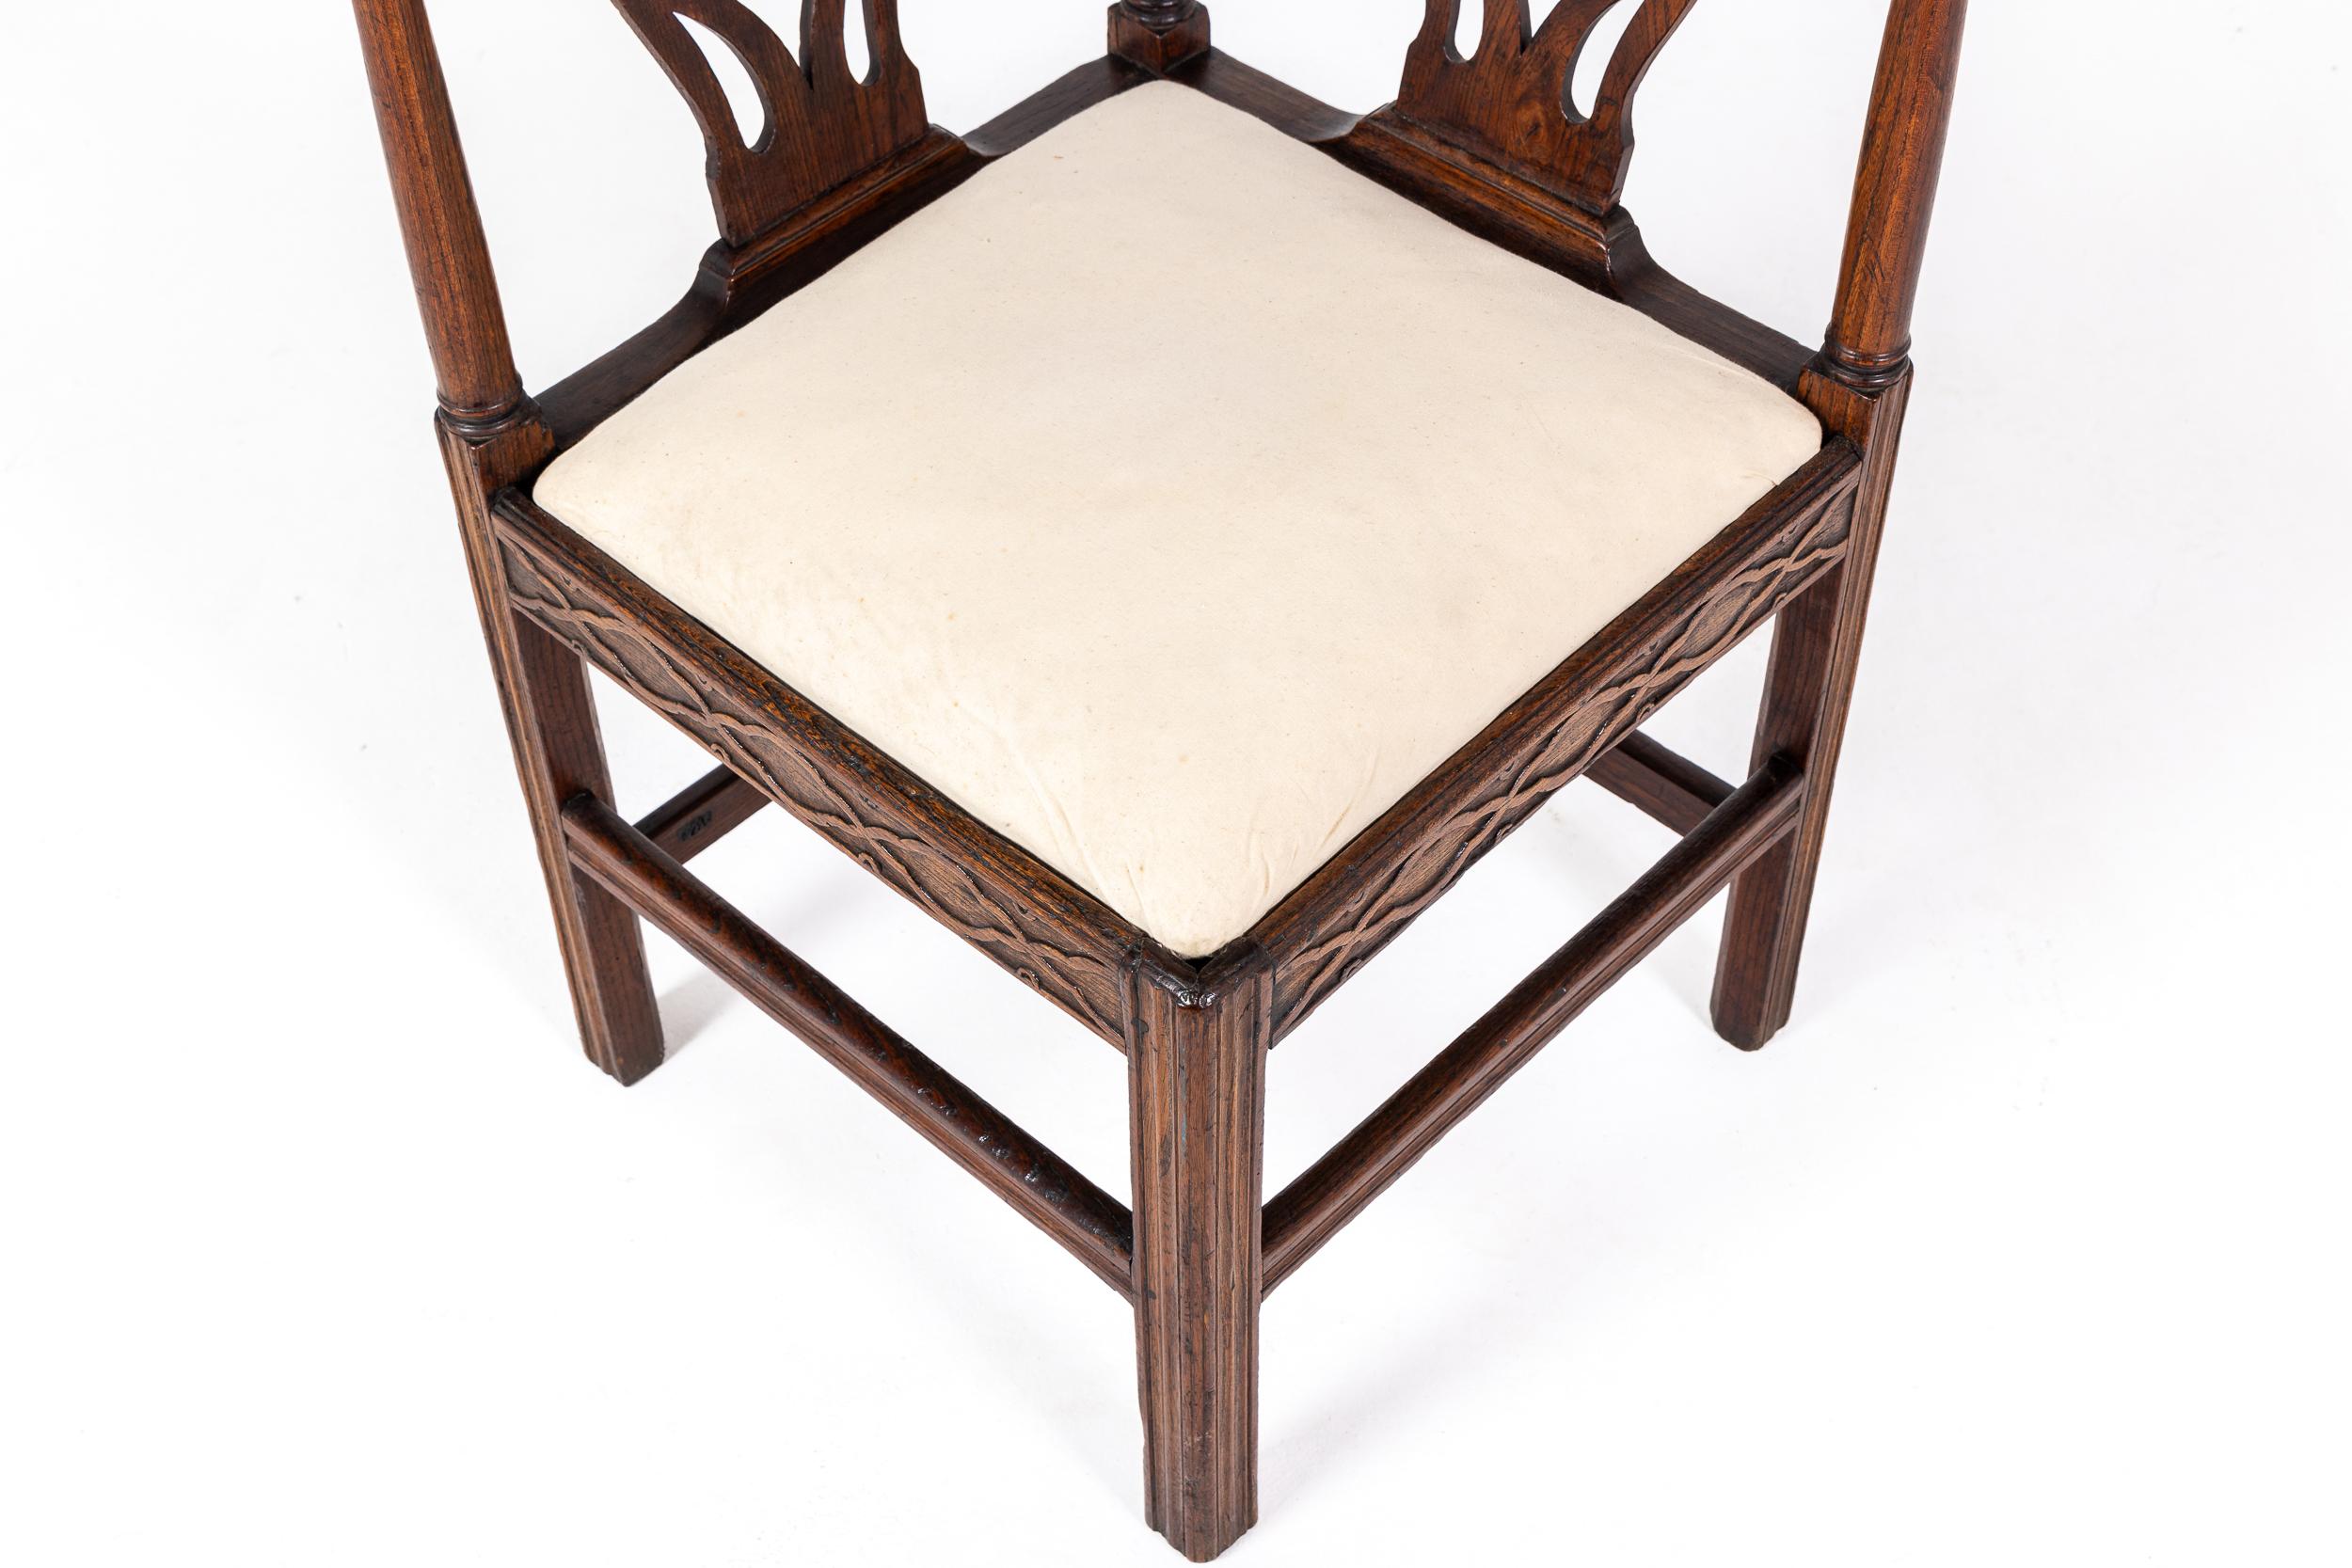 An Interesting Late 18th Century English Oak Corner Chair.

Designed in such a way that they could be tucked away in to a corner when not in use, the corner chair is one of the rarer examples of Georgian furniture. This particular example has the